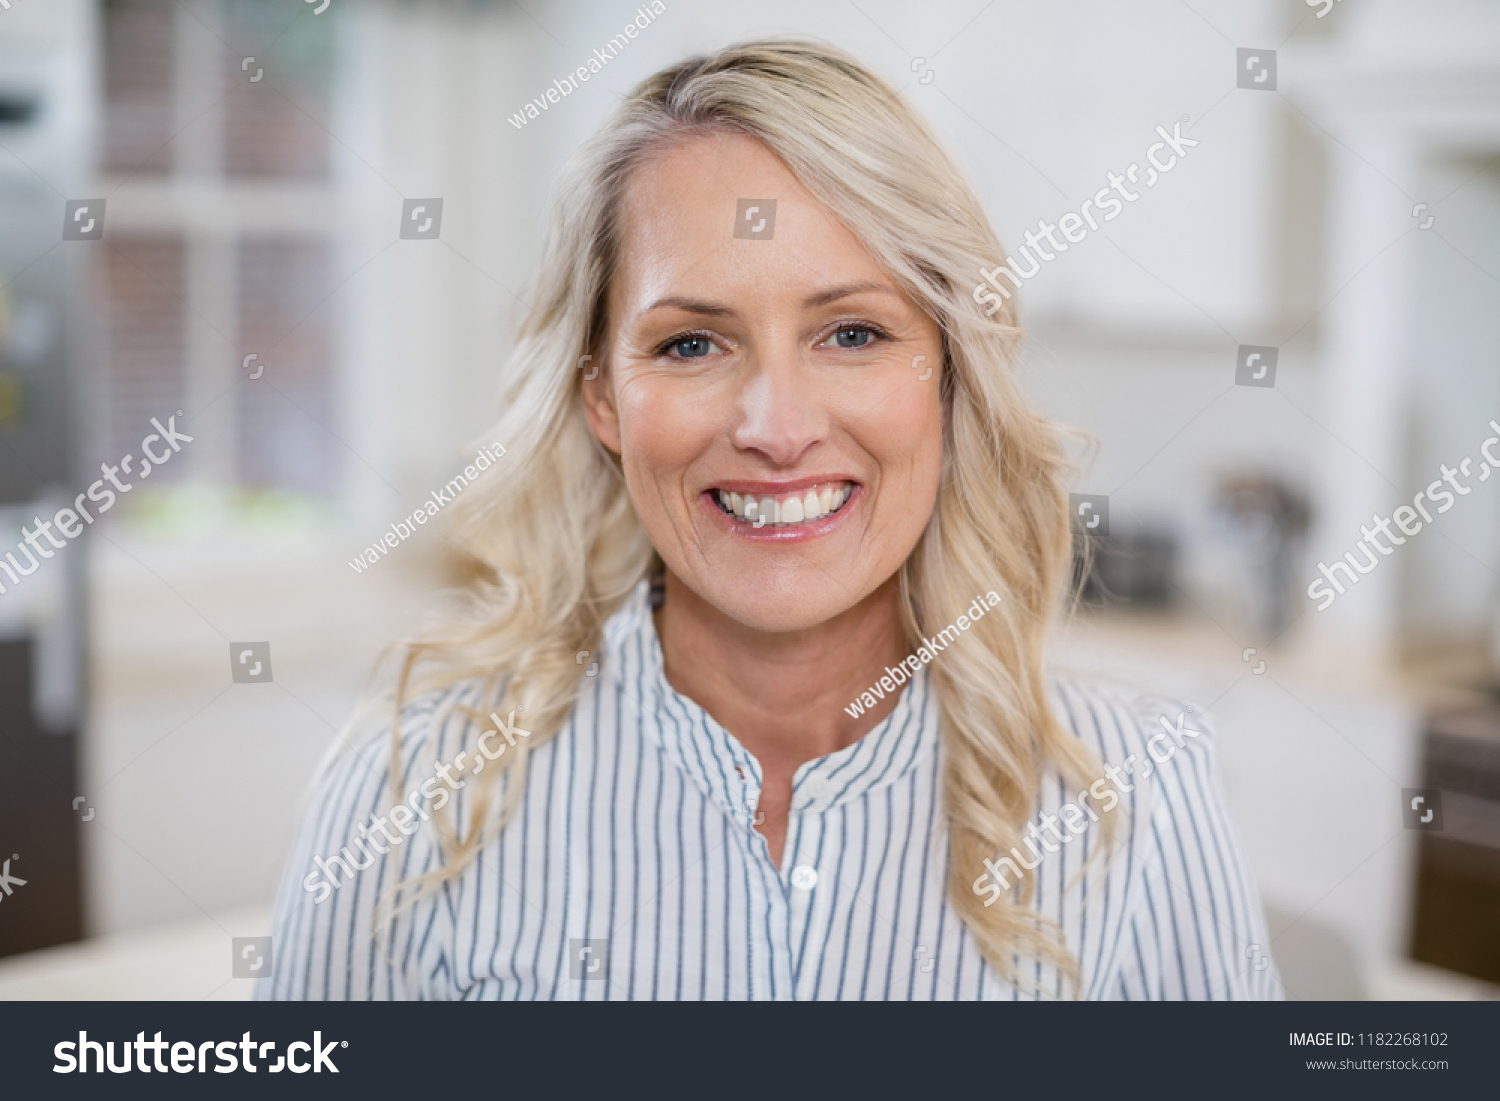 Portrait of beautiful woman smiling at home #1182268102